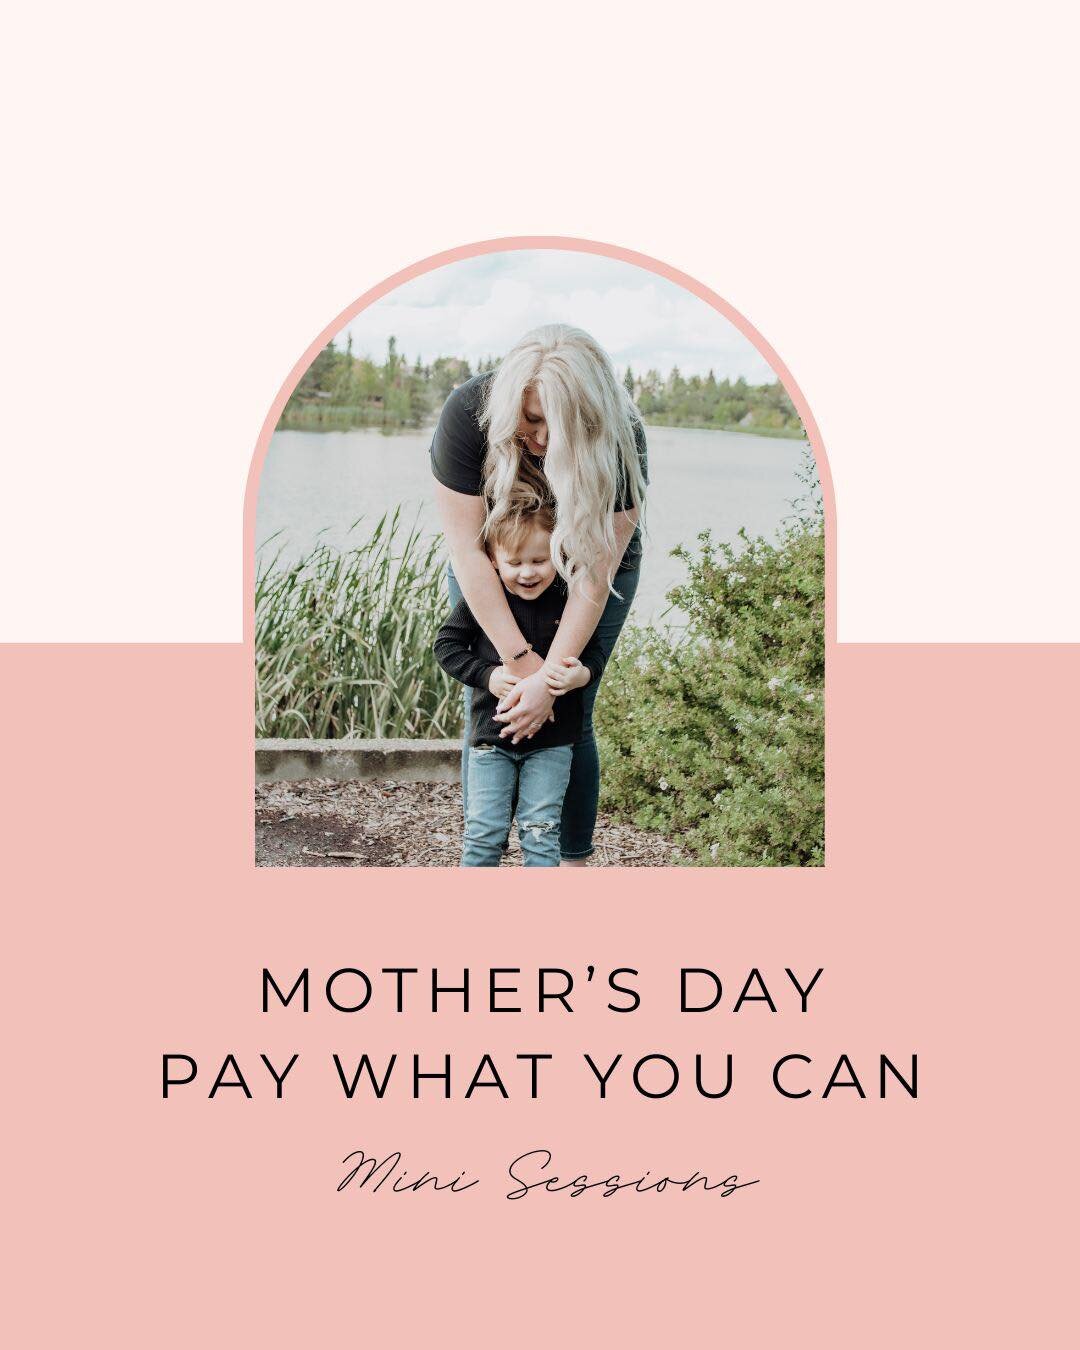 🌷📸 Capture the Love this Mother's Day! 📸🌷

Attention all amazing moms and mother figures! 🌟 This Mother's Day, treat yourself to a special gift that will last a lifetime - a beautiful family photoshoot! 📷✨

At LillyForeverPhotography, we're thr